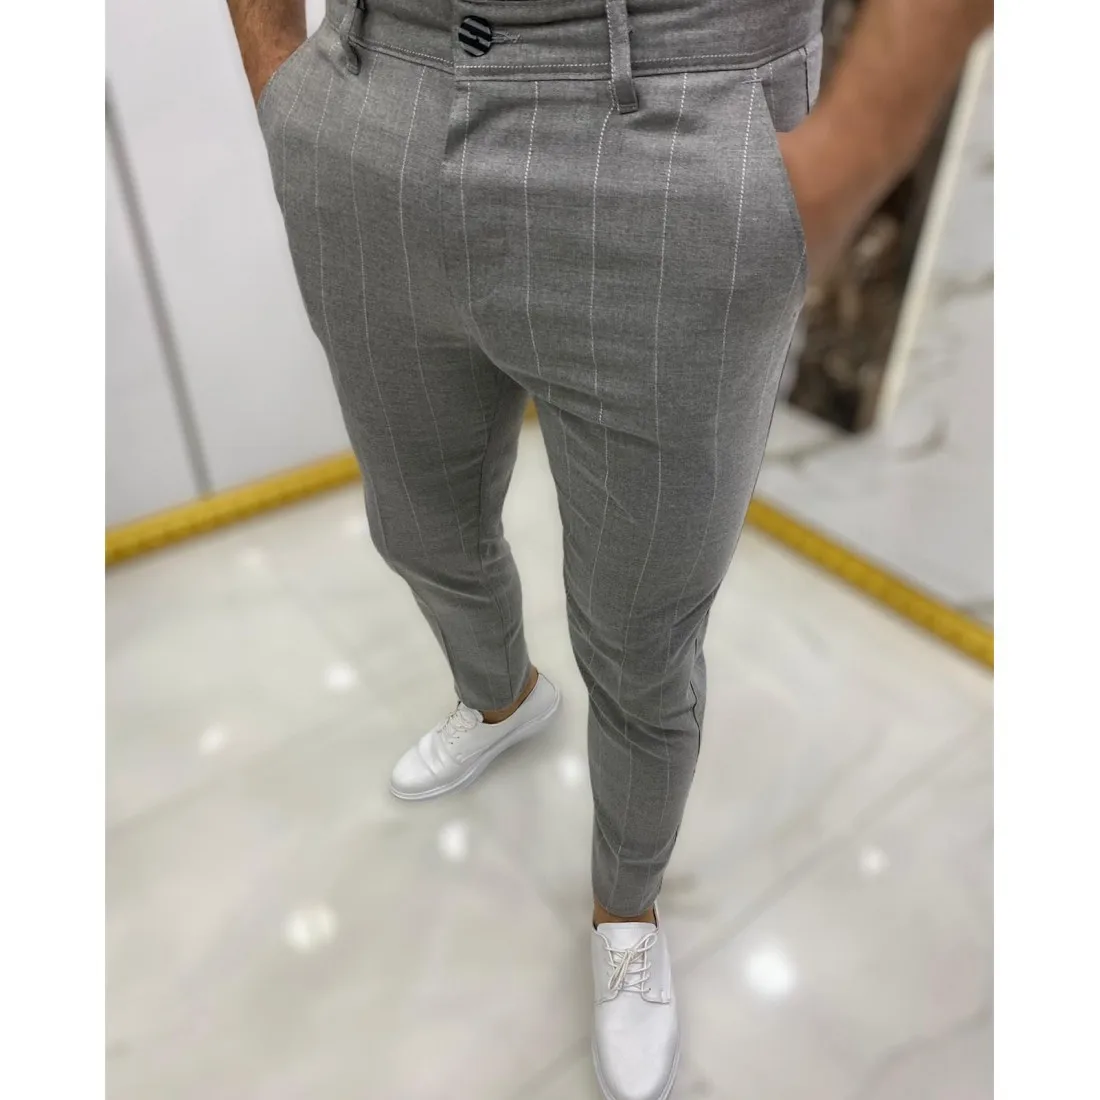 Men's Business Casual Pants Sports Street Foot  Pencil Pants  New  For Business Office Workplace Daily Wear Stretch Pants Summer 4